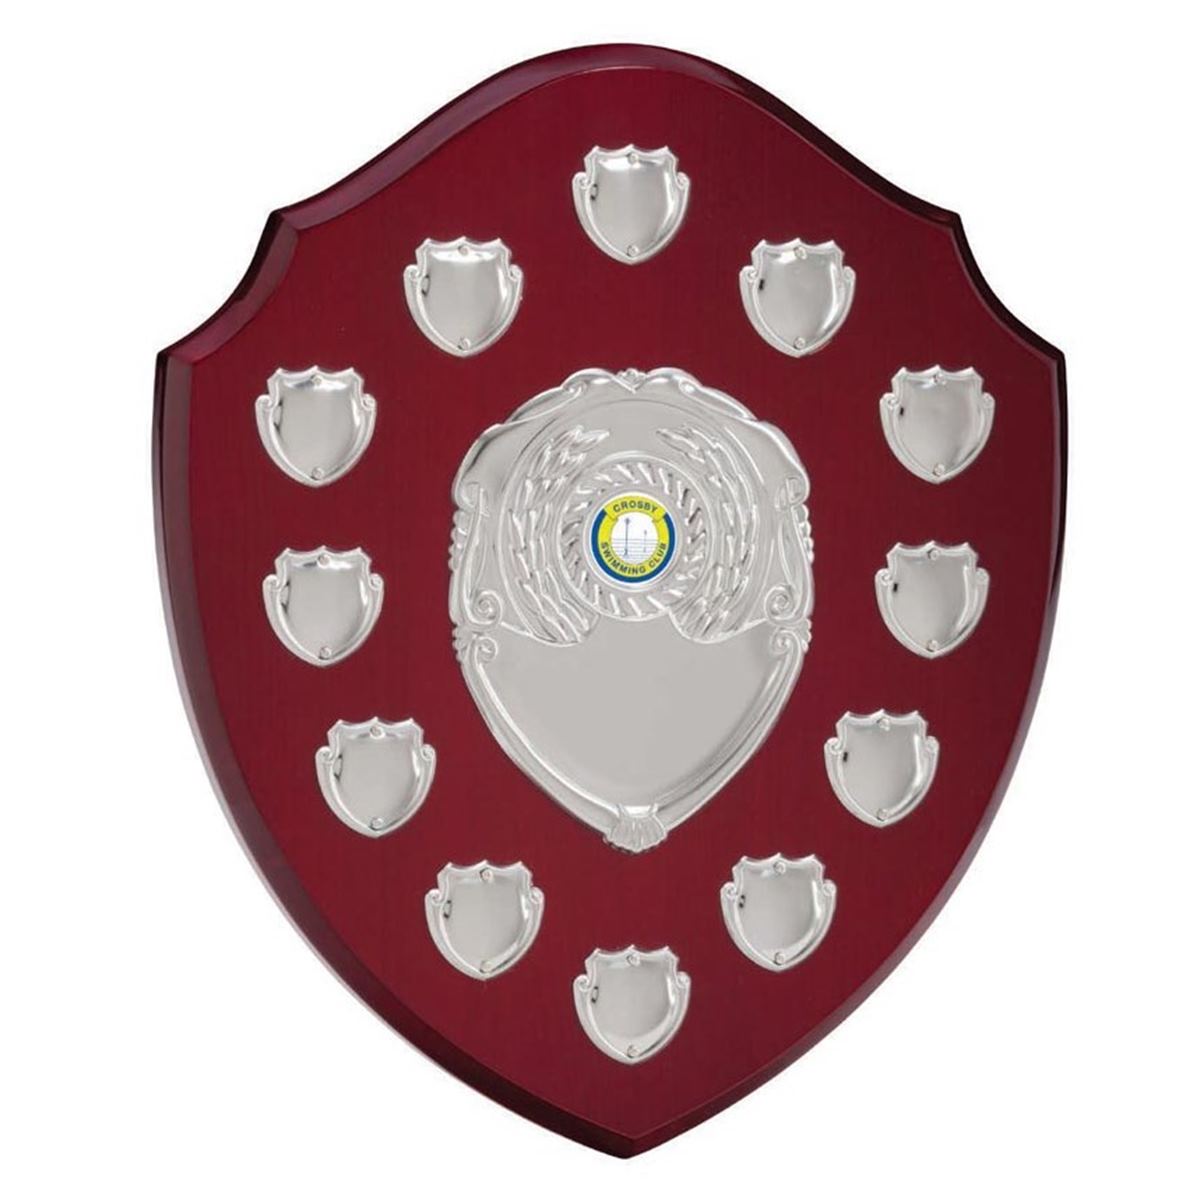 The Supreme Rosewood Annual Shield Award - 12 Side Shields